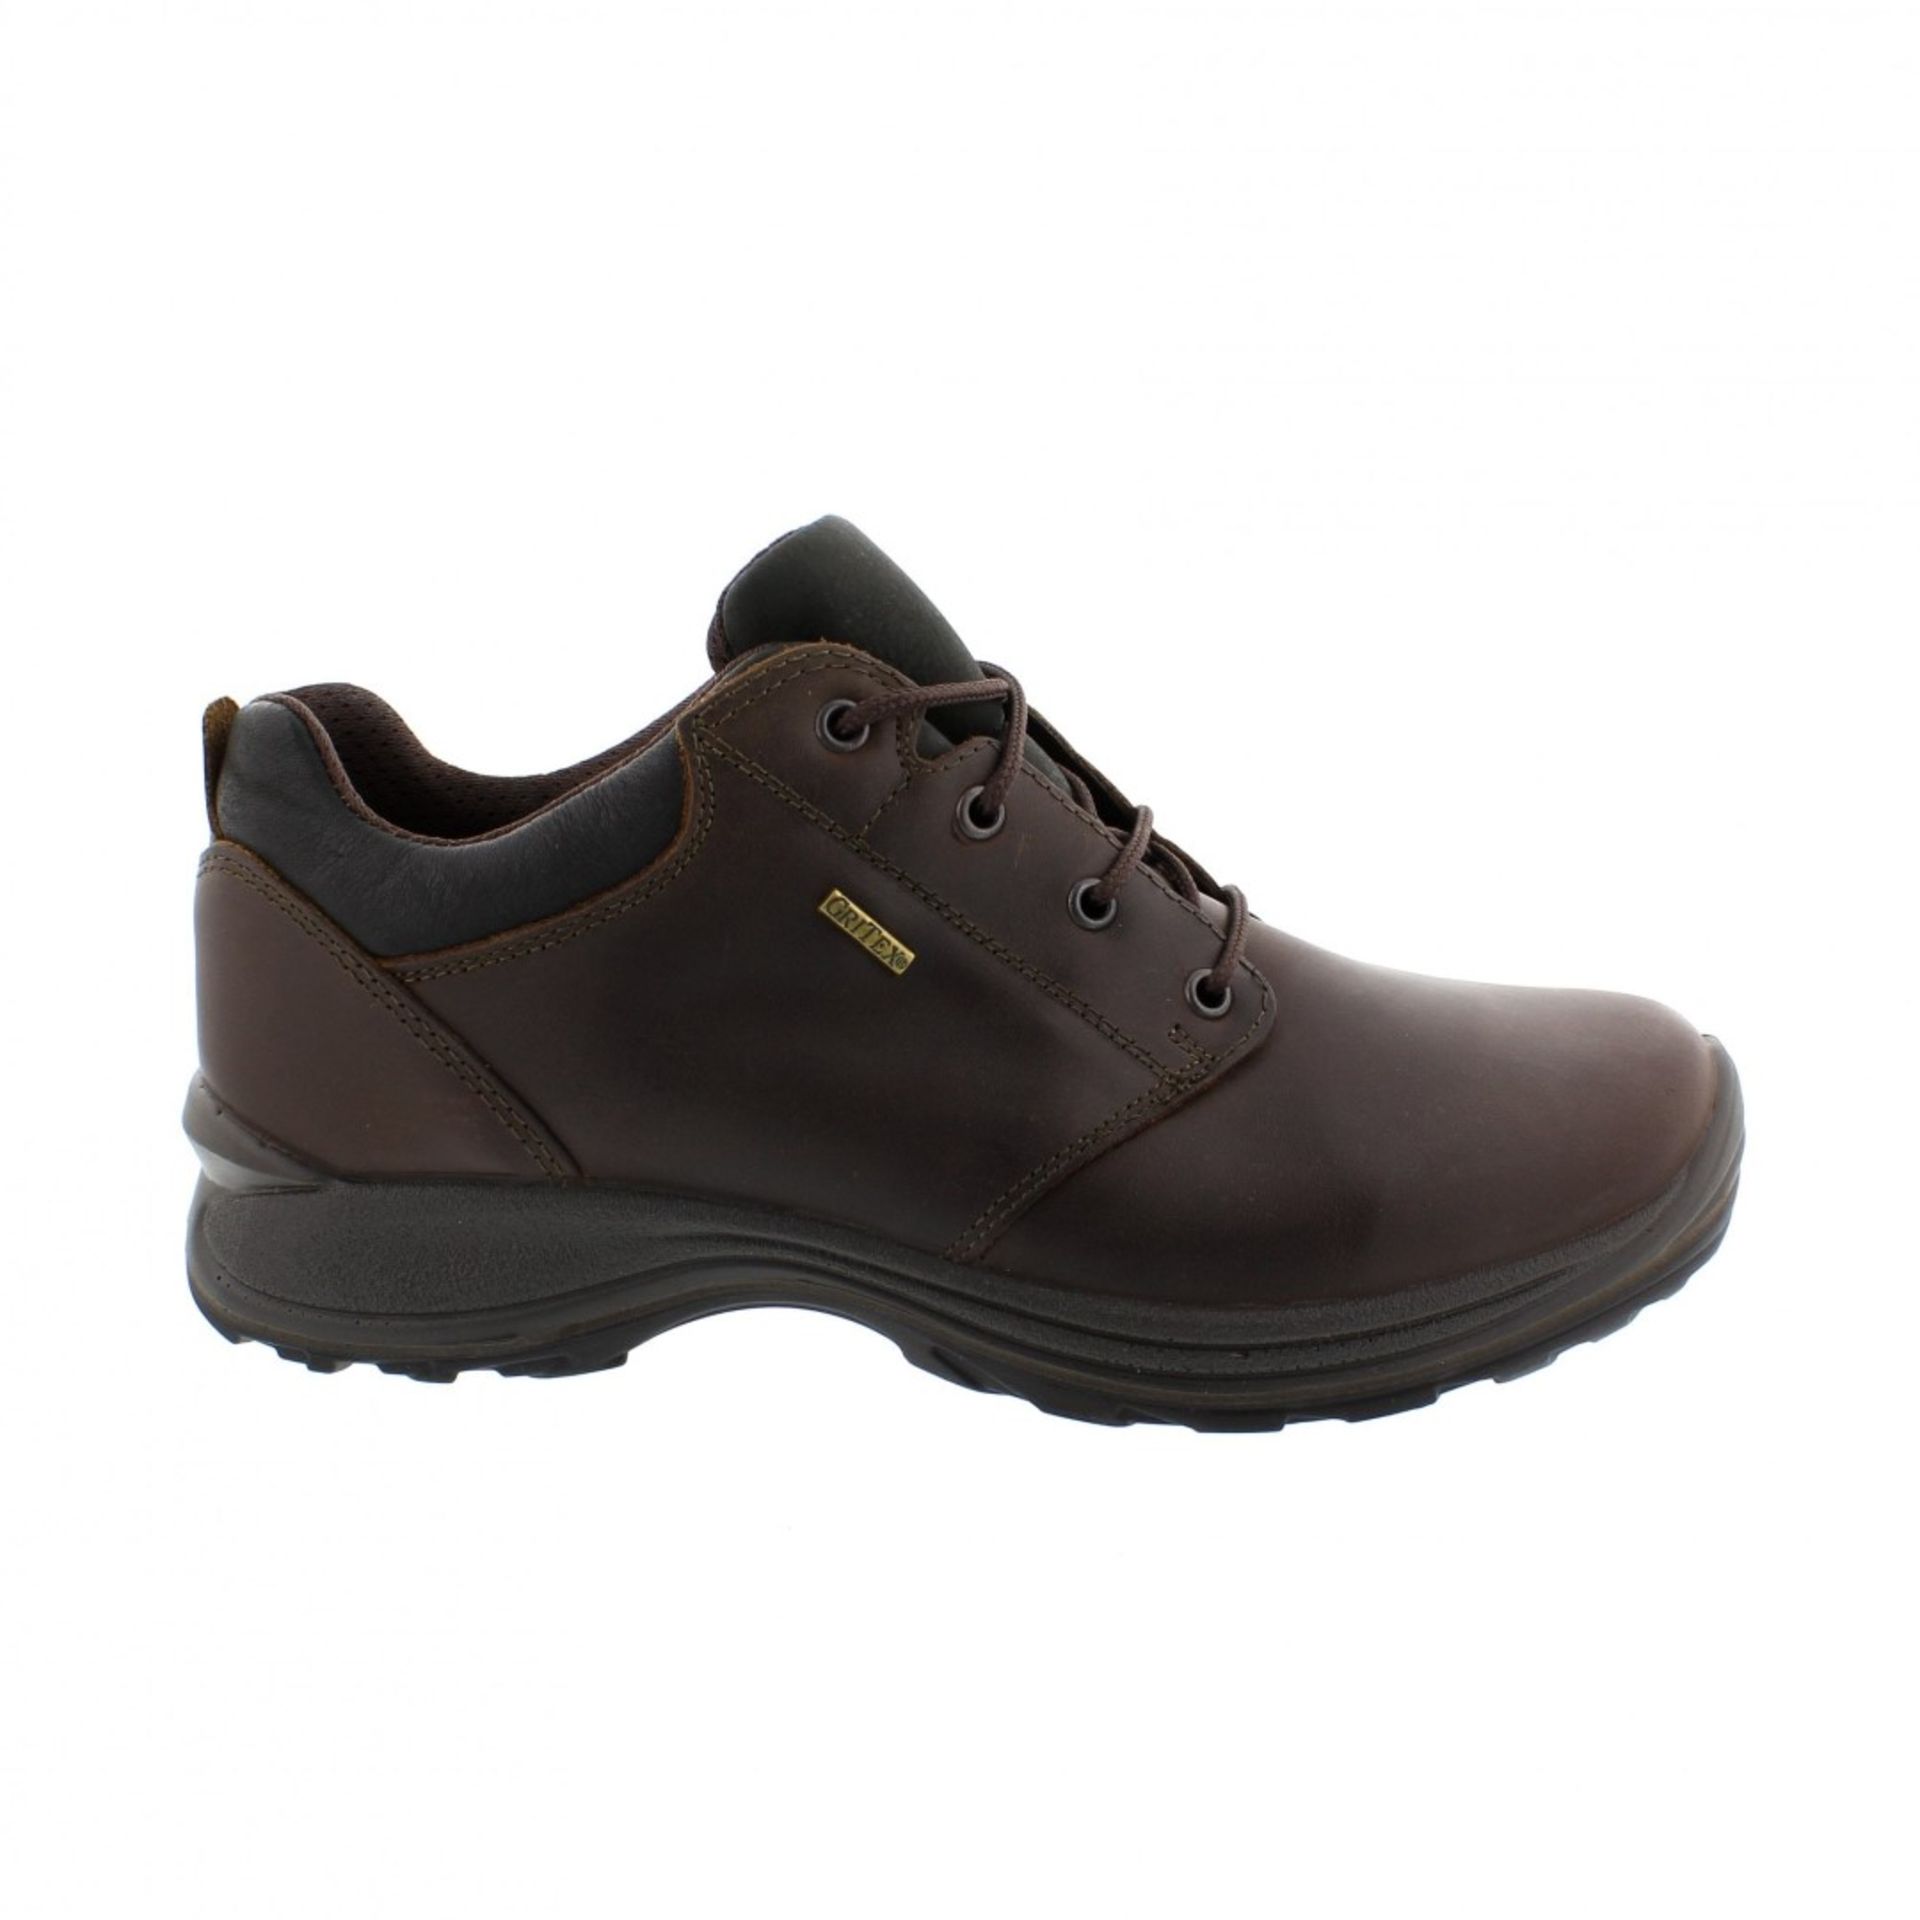 1 x Pair of Men's Grisport Brown Leather GriTex Shoes - Rogerson Footwear - Brand New and Boxed - - Image 6 of 9